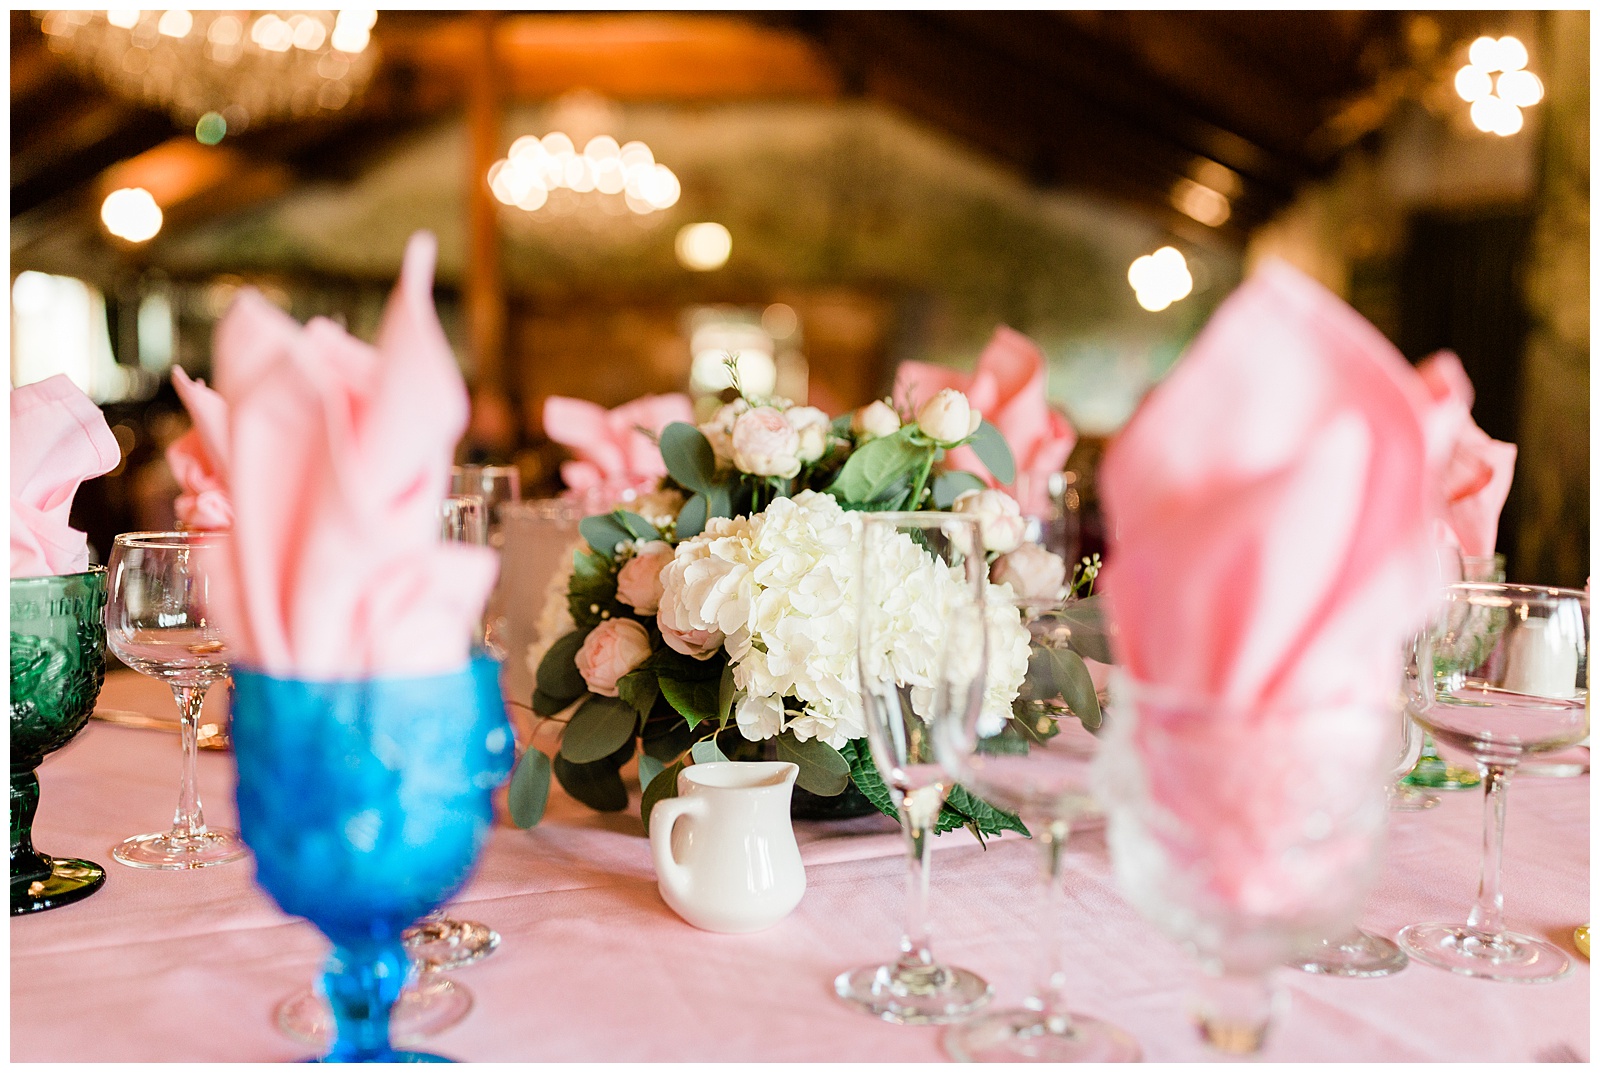 Pink and white decor at a Madonna Inn wedding reception